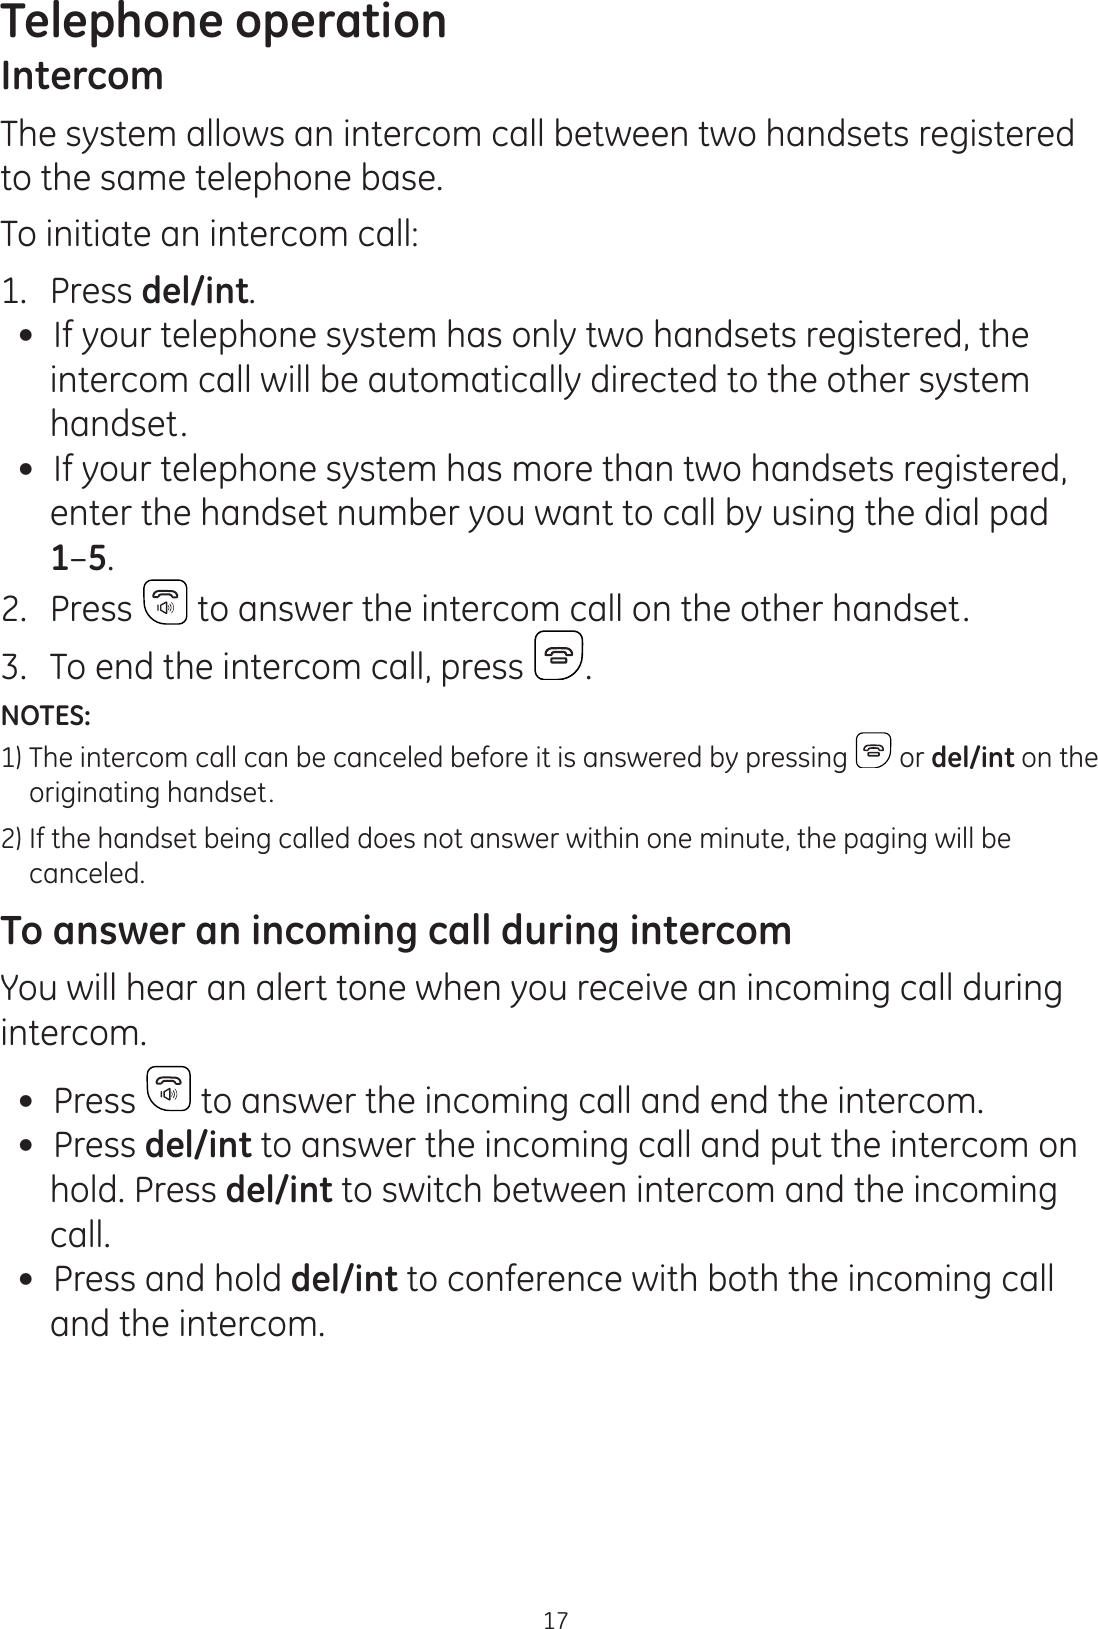 Telephone operation17IntercomThe system allows an intercom call between two handsets registered to the same telephone base.To initiate an intercom call:1.  Press del/int. If your telephone system has only two handsets registered, the intercom call will be automatically directed to the other system handset. If your telephone system has more than two handsets registered,  enter the handset number you want to call by using the dial pad  1–5.2.  Press  to answer the intercom call on the other handset.3.  To end the intercom call, press  .NOTES: 1)  The intercom call can be canceled before it is answered by pressing   or del/int on the    originating handset.2)  If the handset being called does not answer within one minute, the paging will be      canceled.To answer an incoming call during intercomYou will hear an alert tone when you receive an incoming call during intercom. Press   to answer the incoming call and end the intercom.  Press del/int to answer the incoming call and put the intercom on hold. Press del/int to switch between intercom and the incoming call. Press and hold del/int to conference with both the incoming call and the intercom.